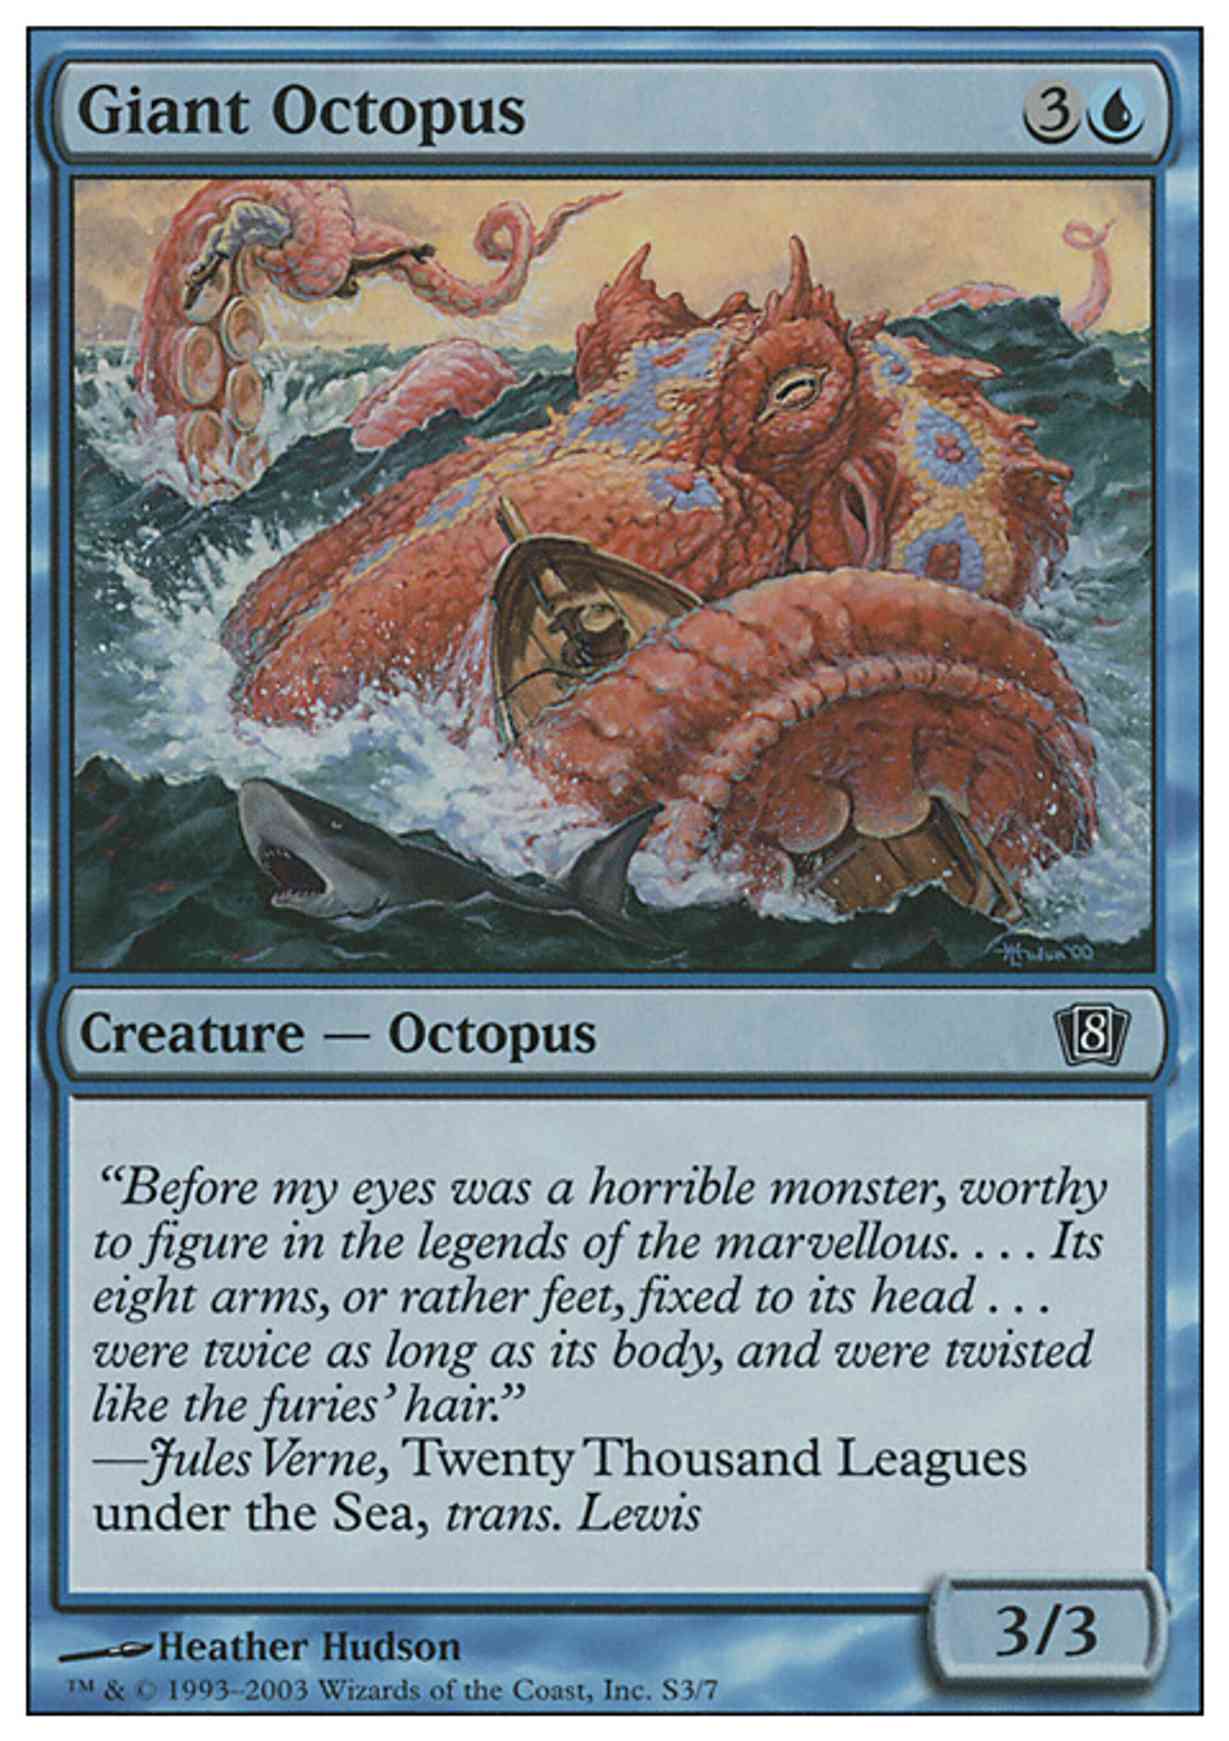 Giant Octopus magic card front